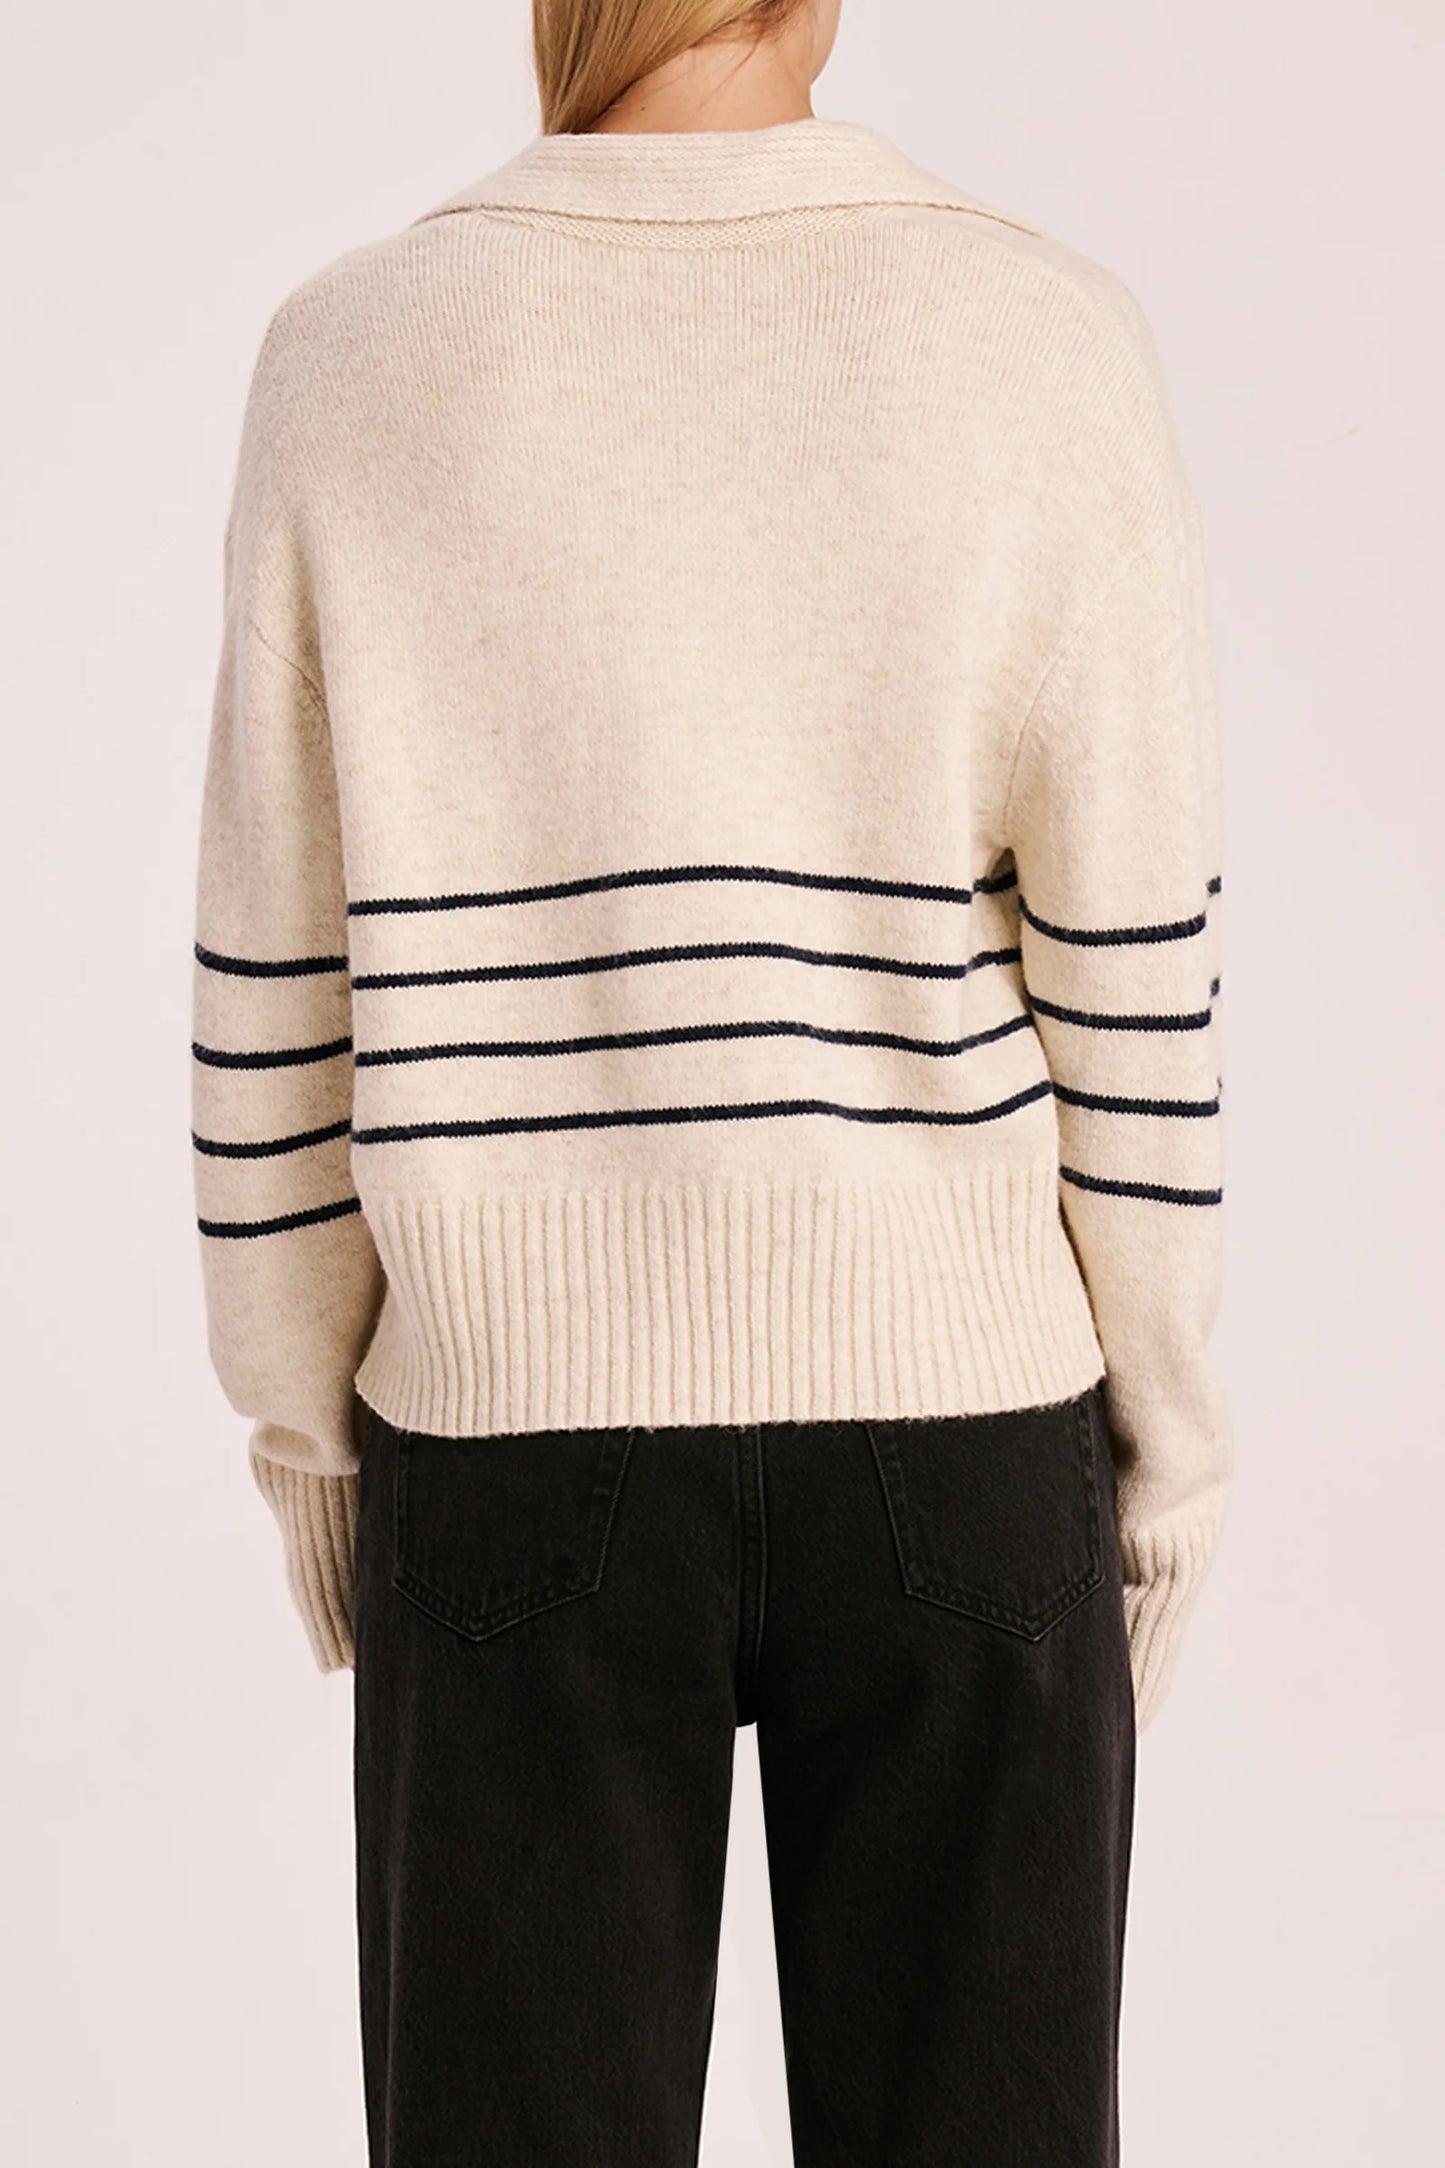 NUDE LUCY - Logan Rugby Knit - CLOUD STRIPE